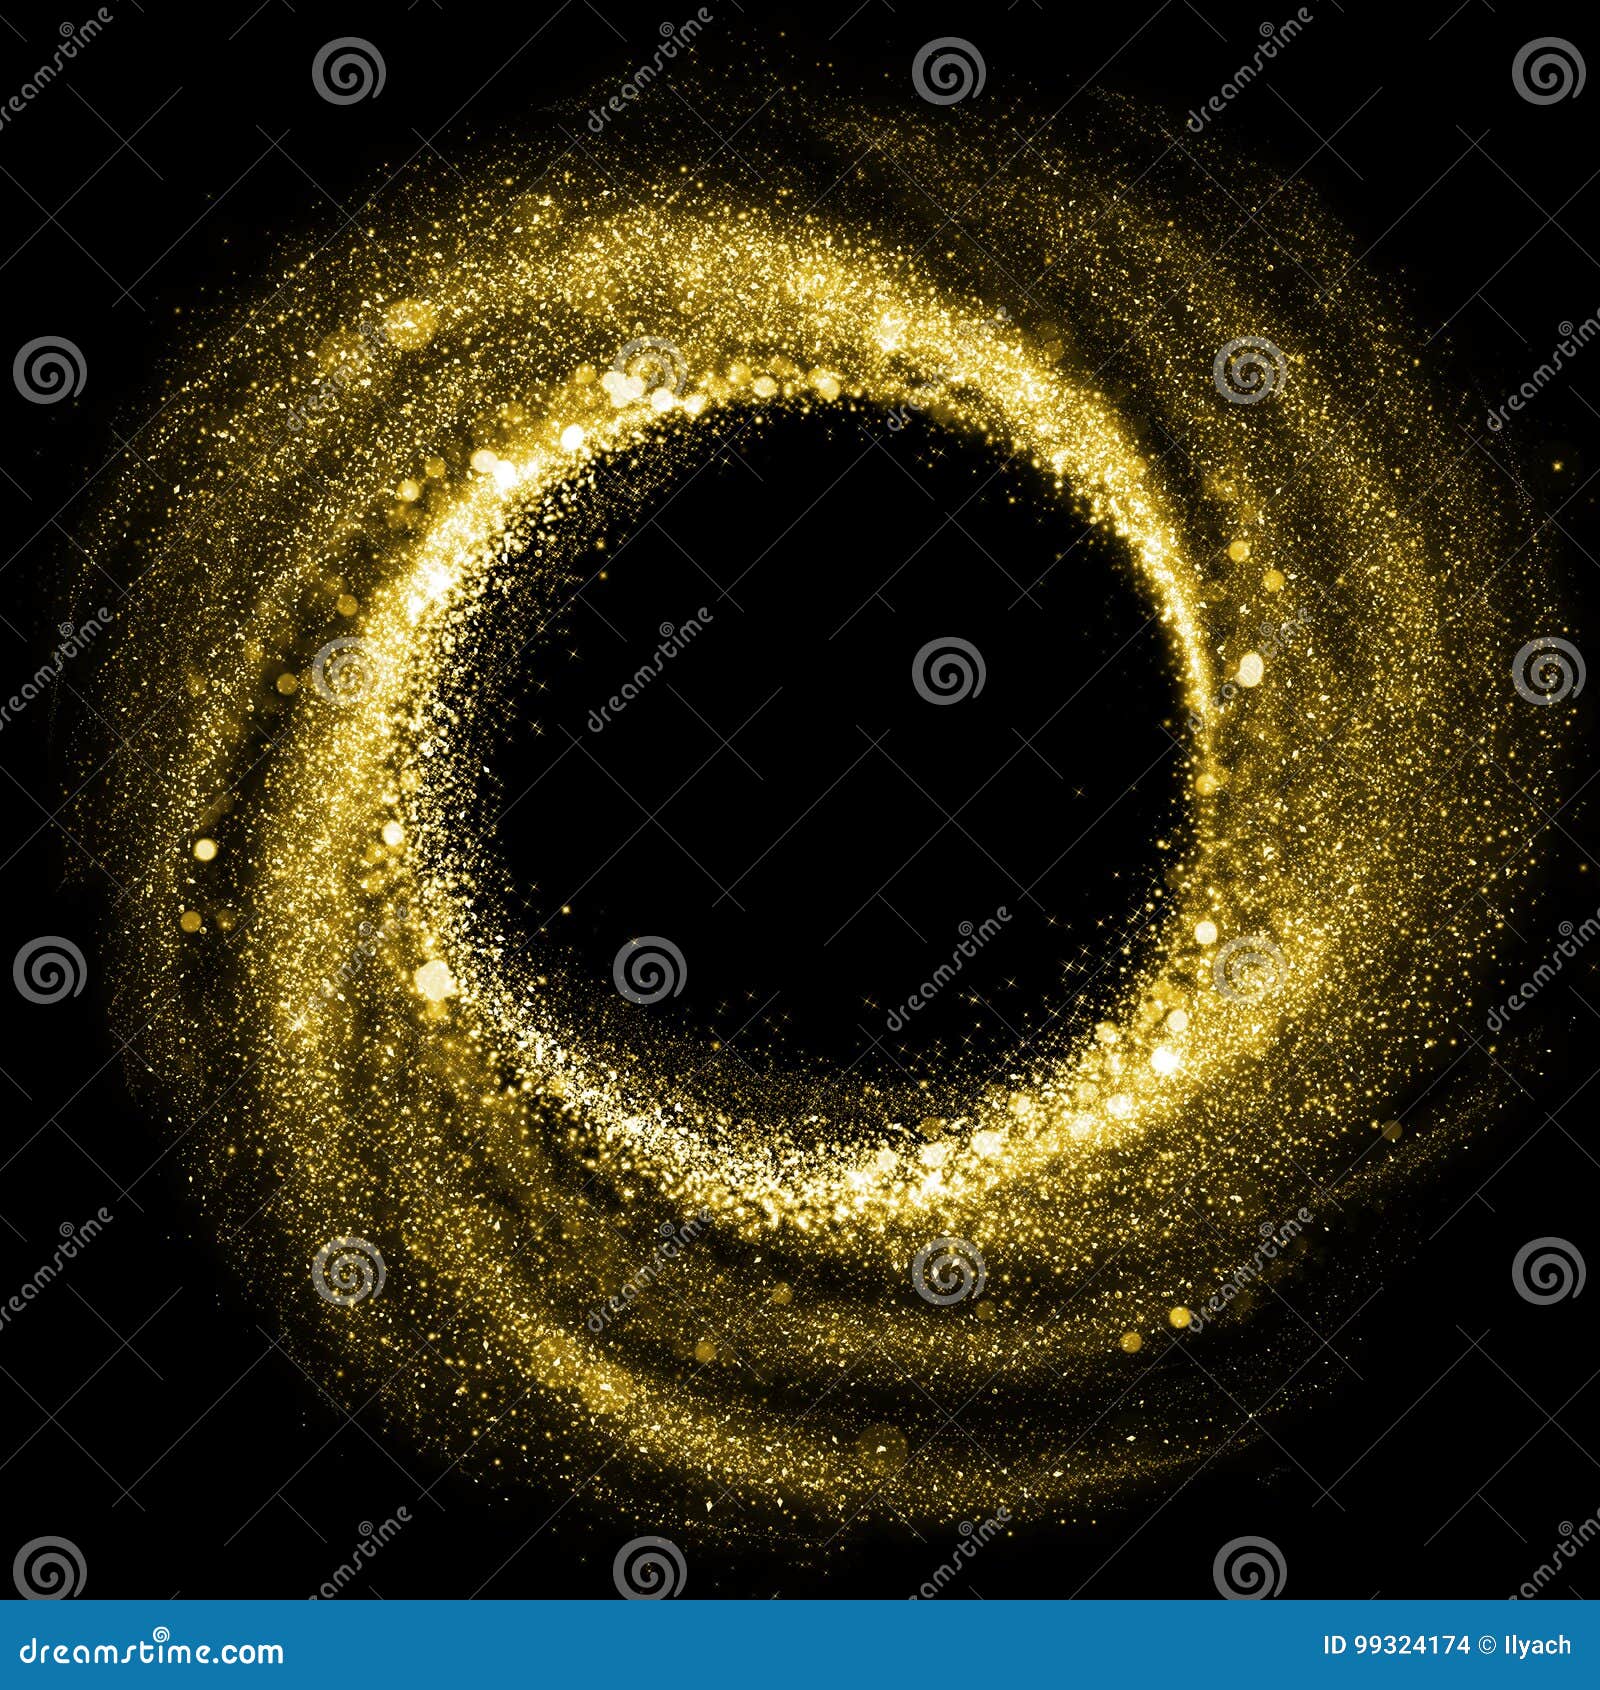 gold particle swirl effect. golden glitter circle twirl trace